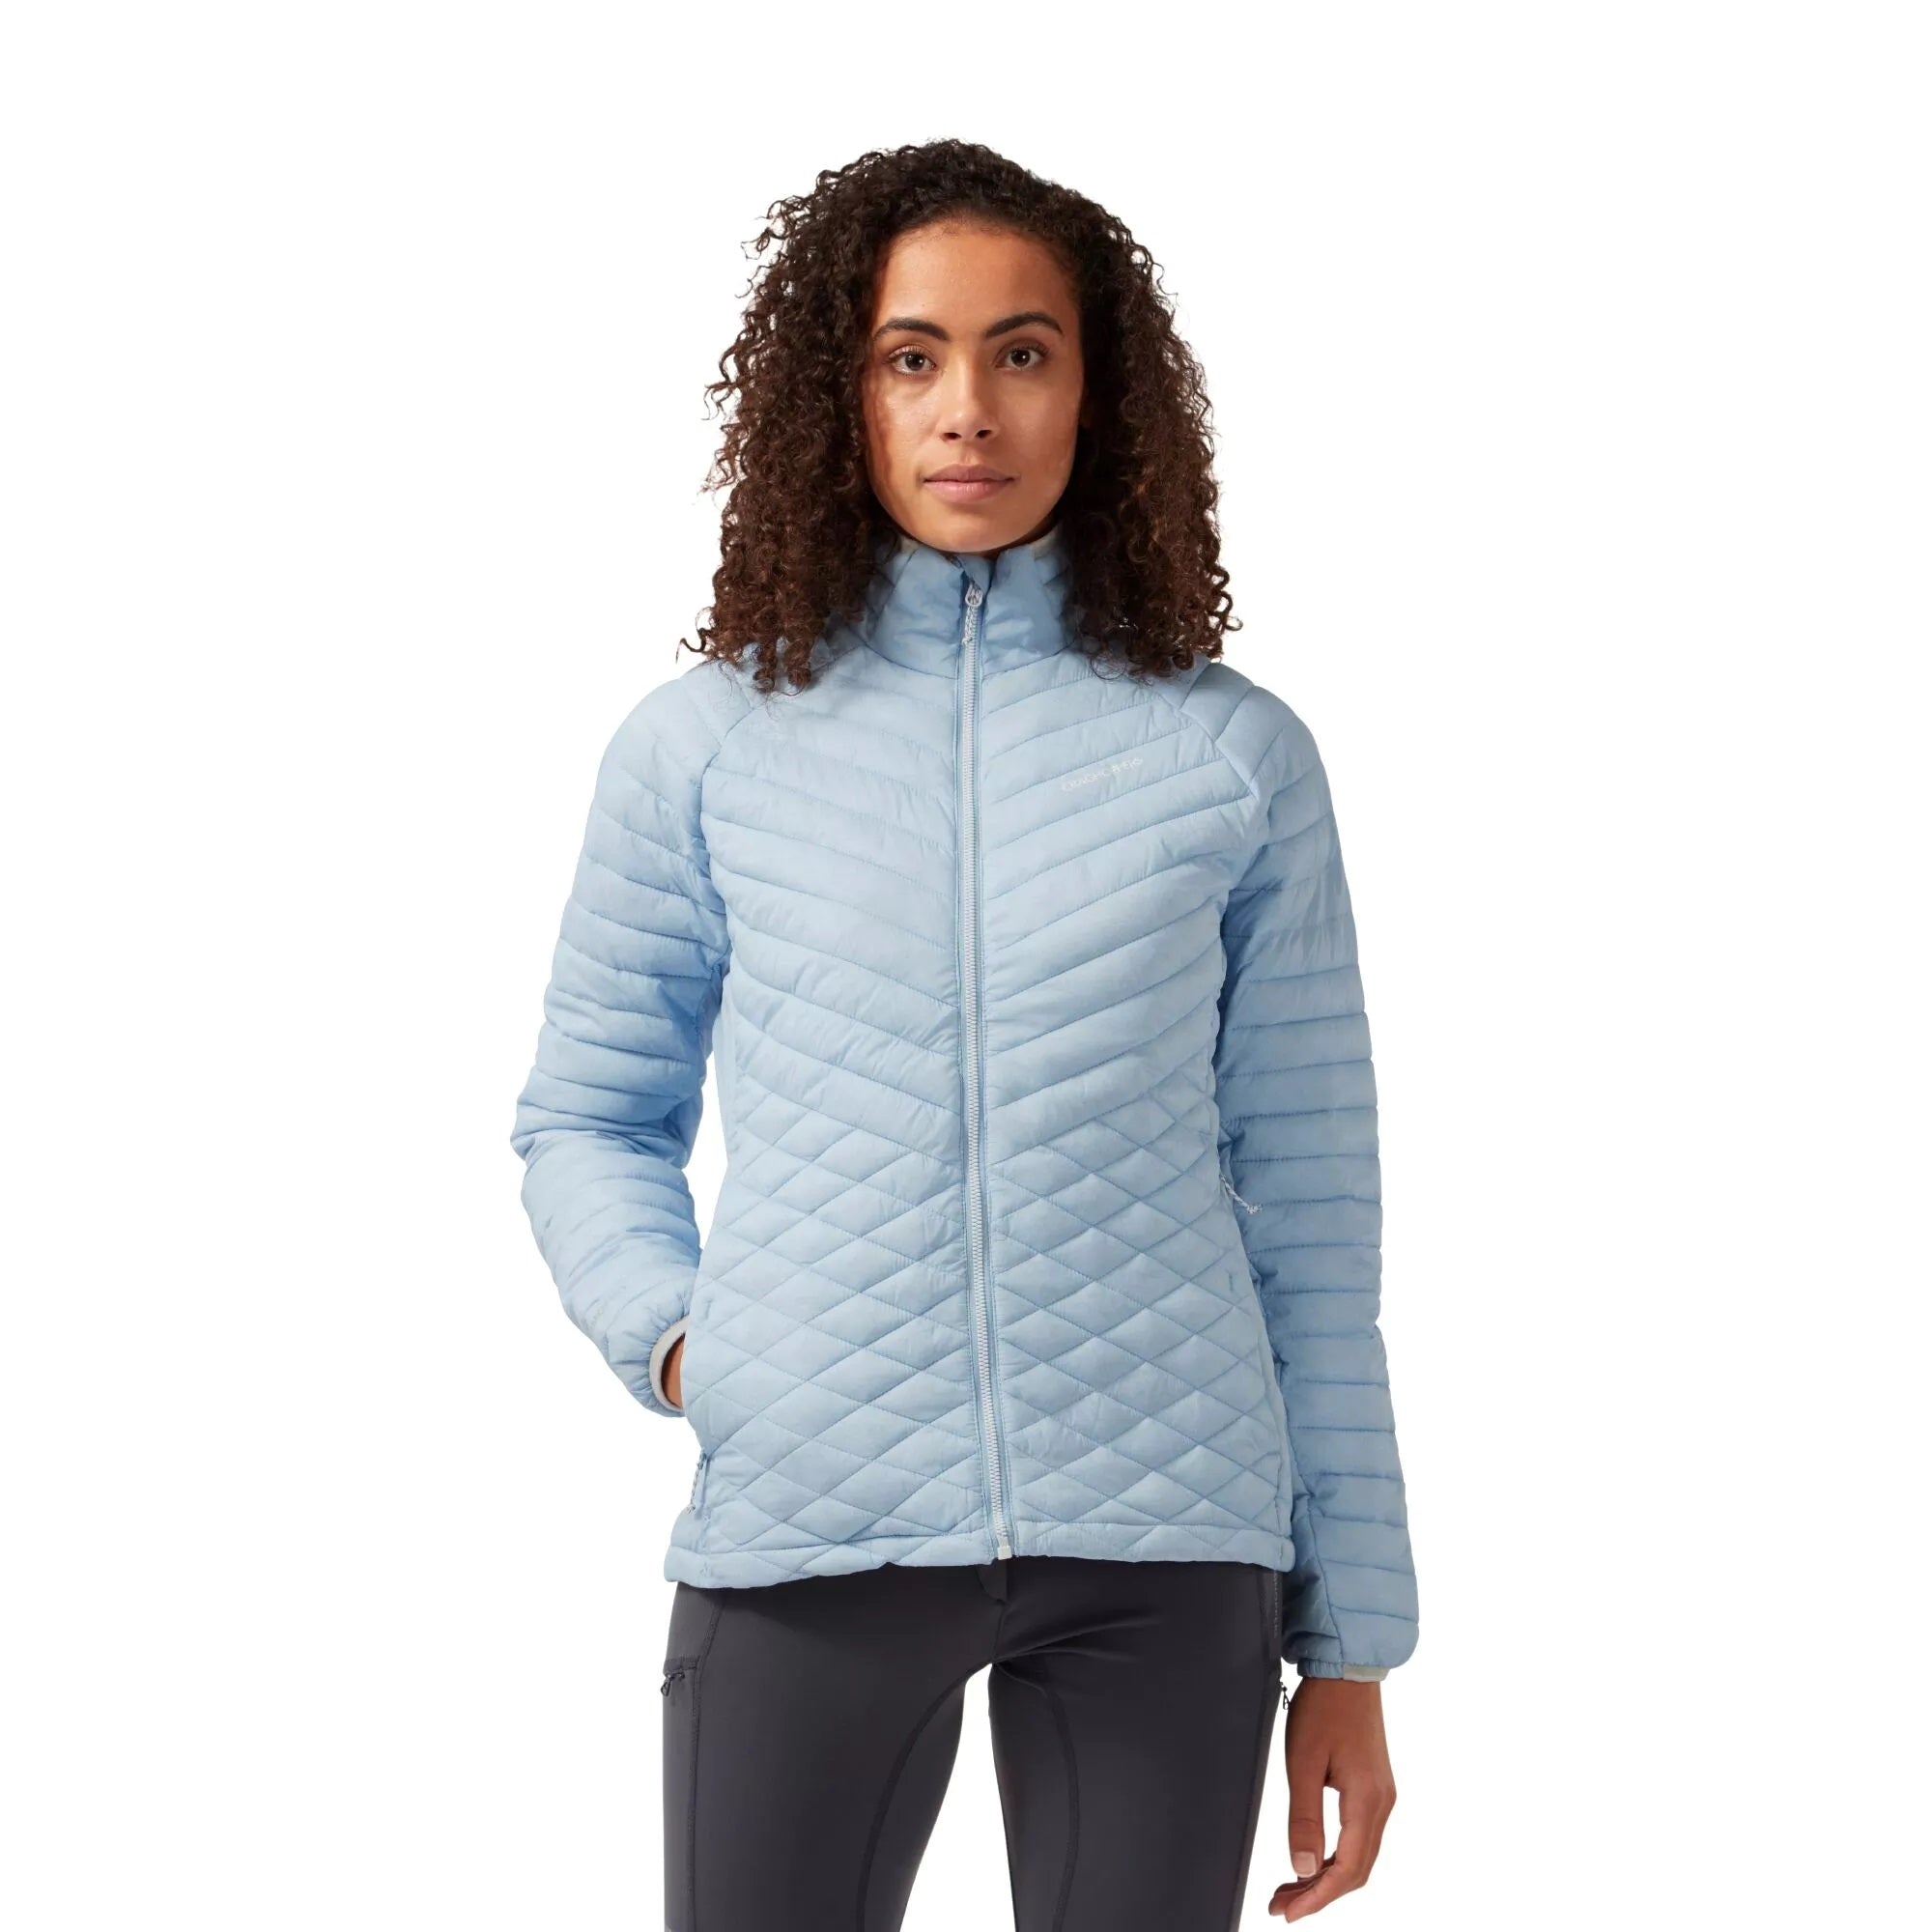 Craghoppers Women's ExpoLite Insulated Jacket